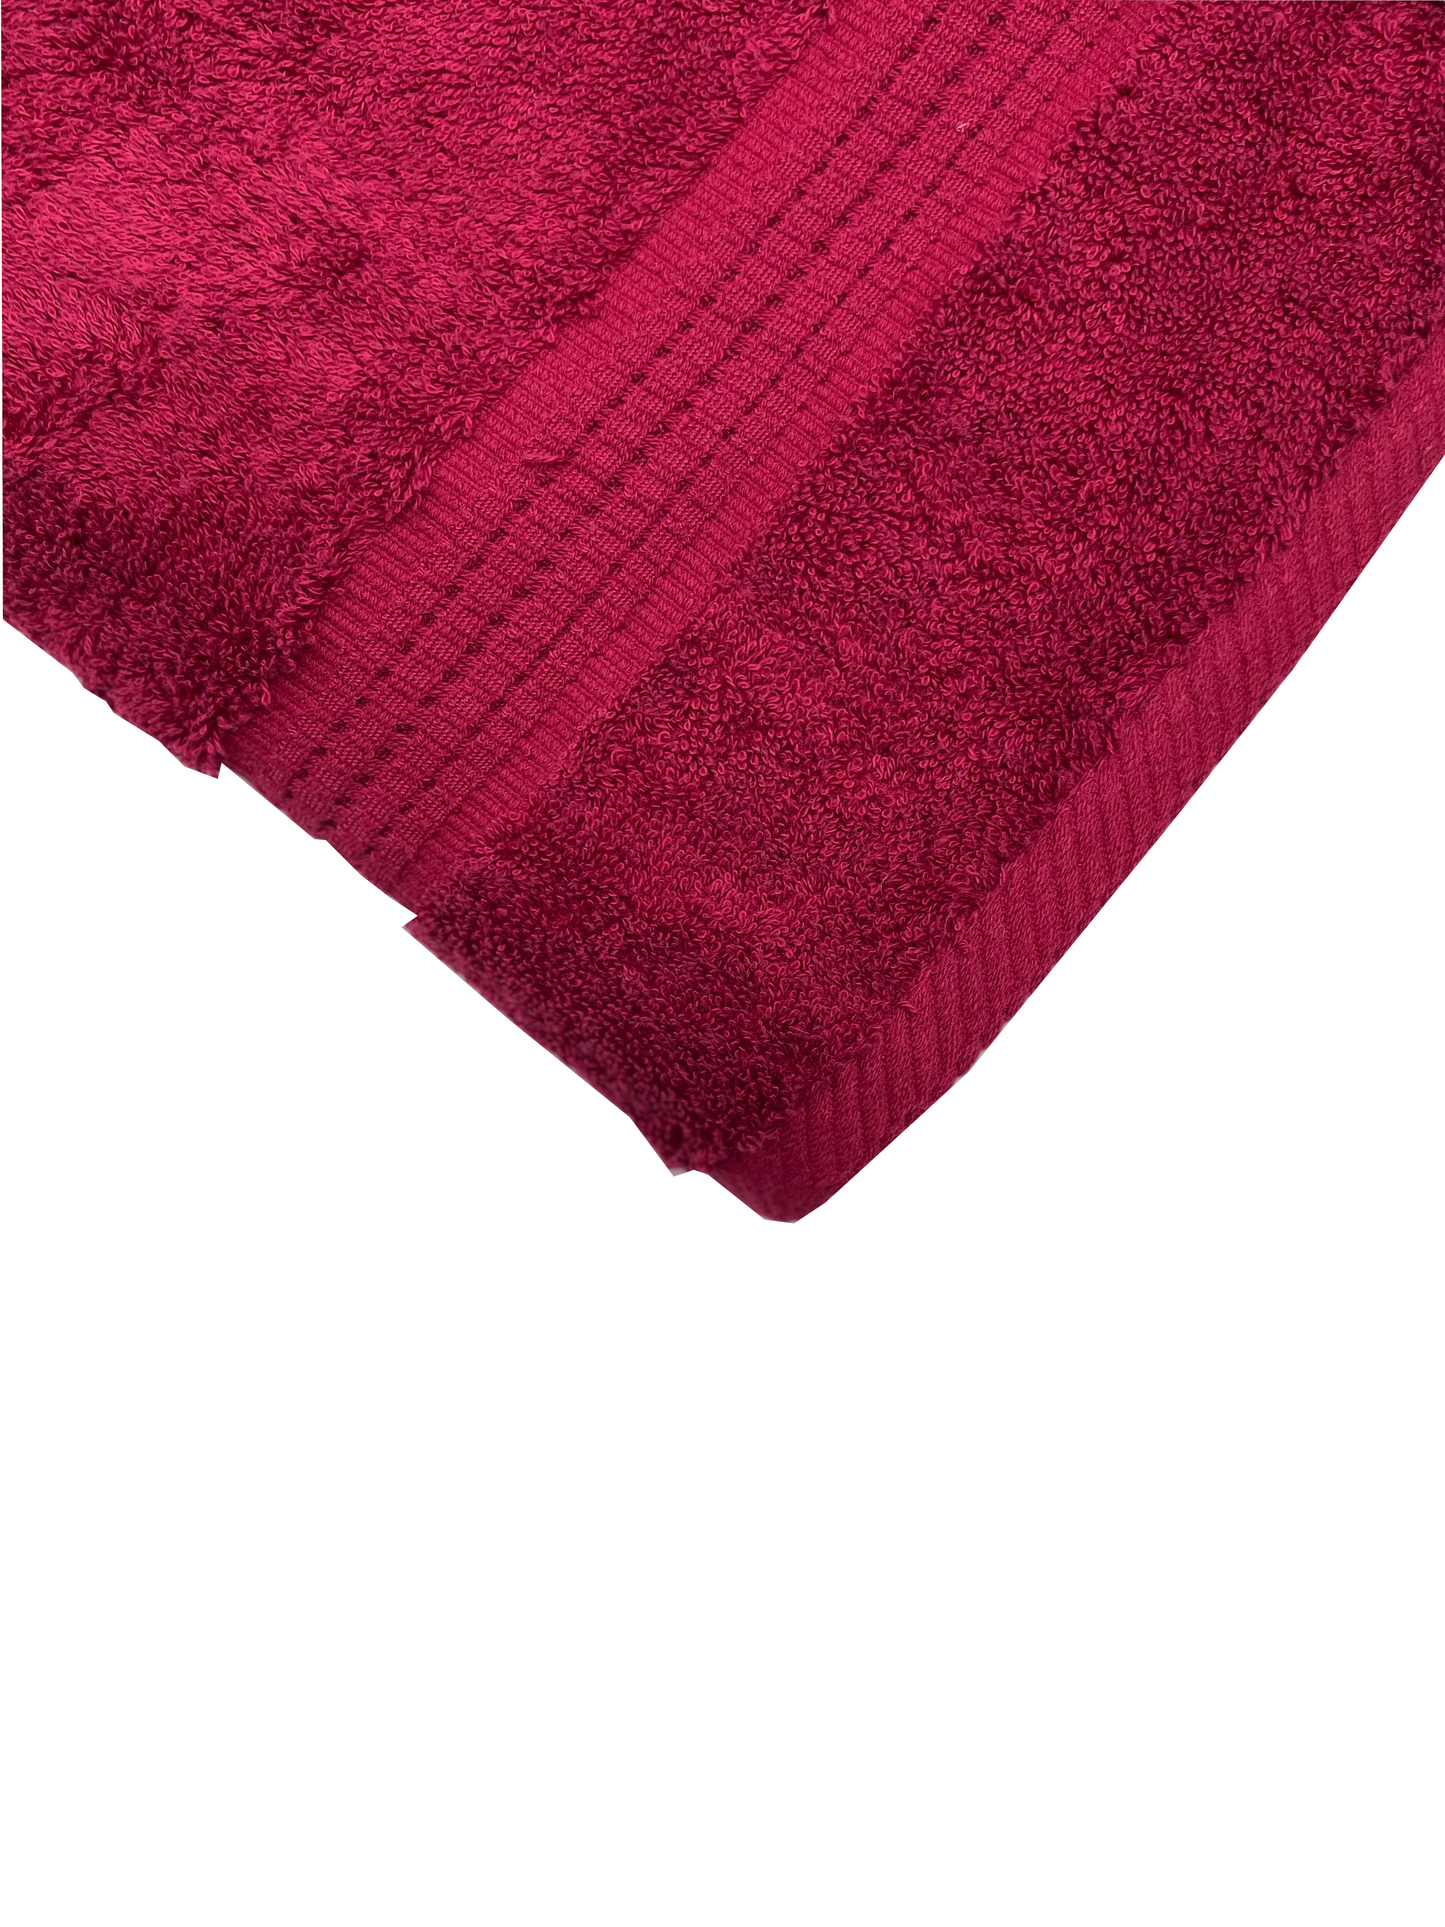 EGYPTIAN COTTON TOWELS